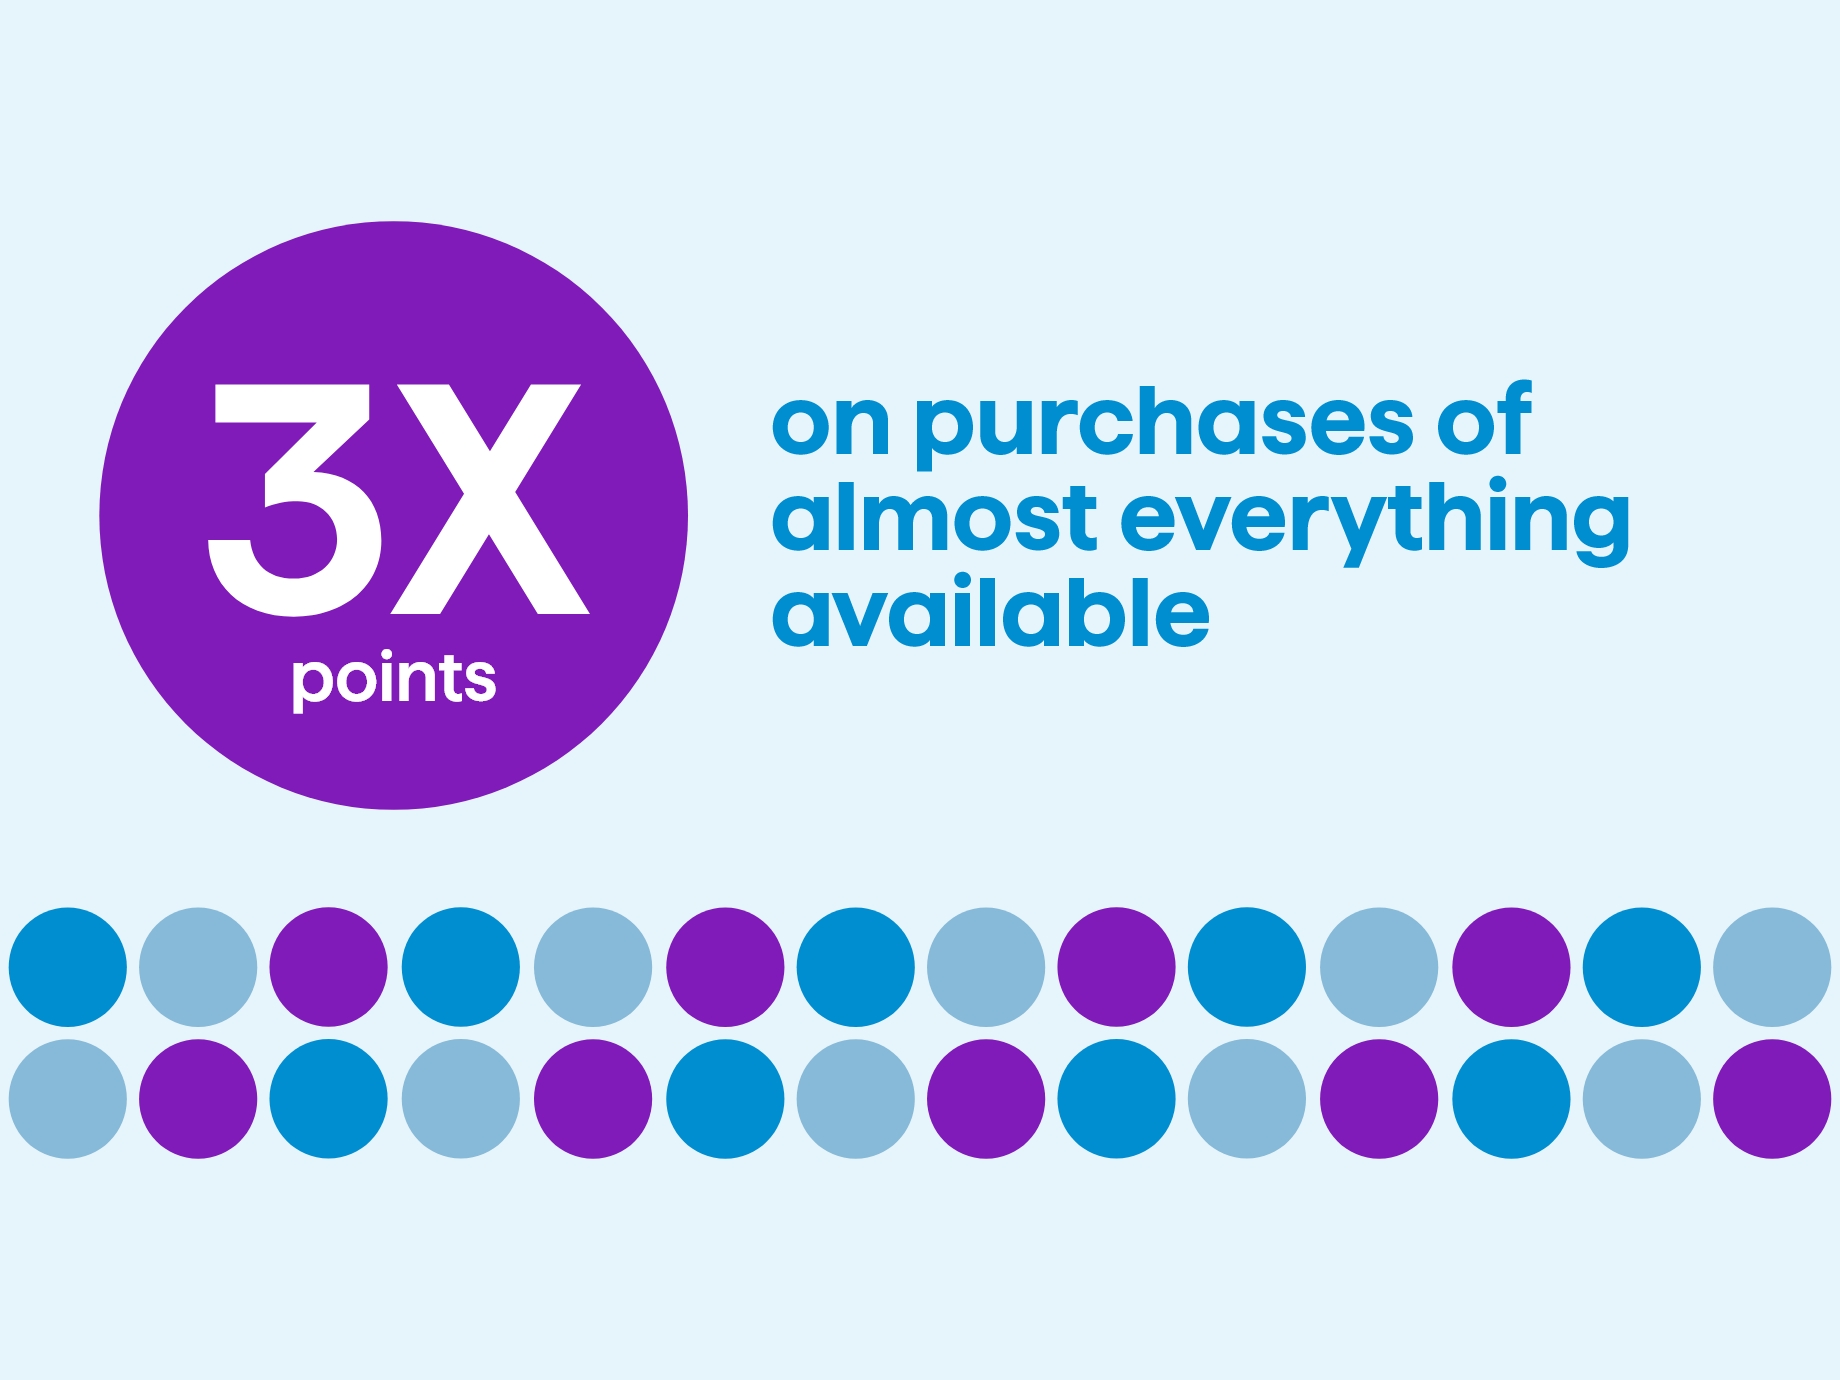 3x the points on purchases of almost everything available